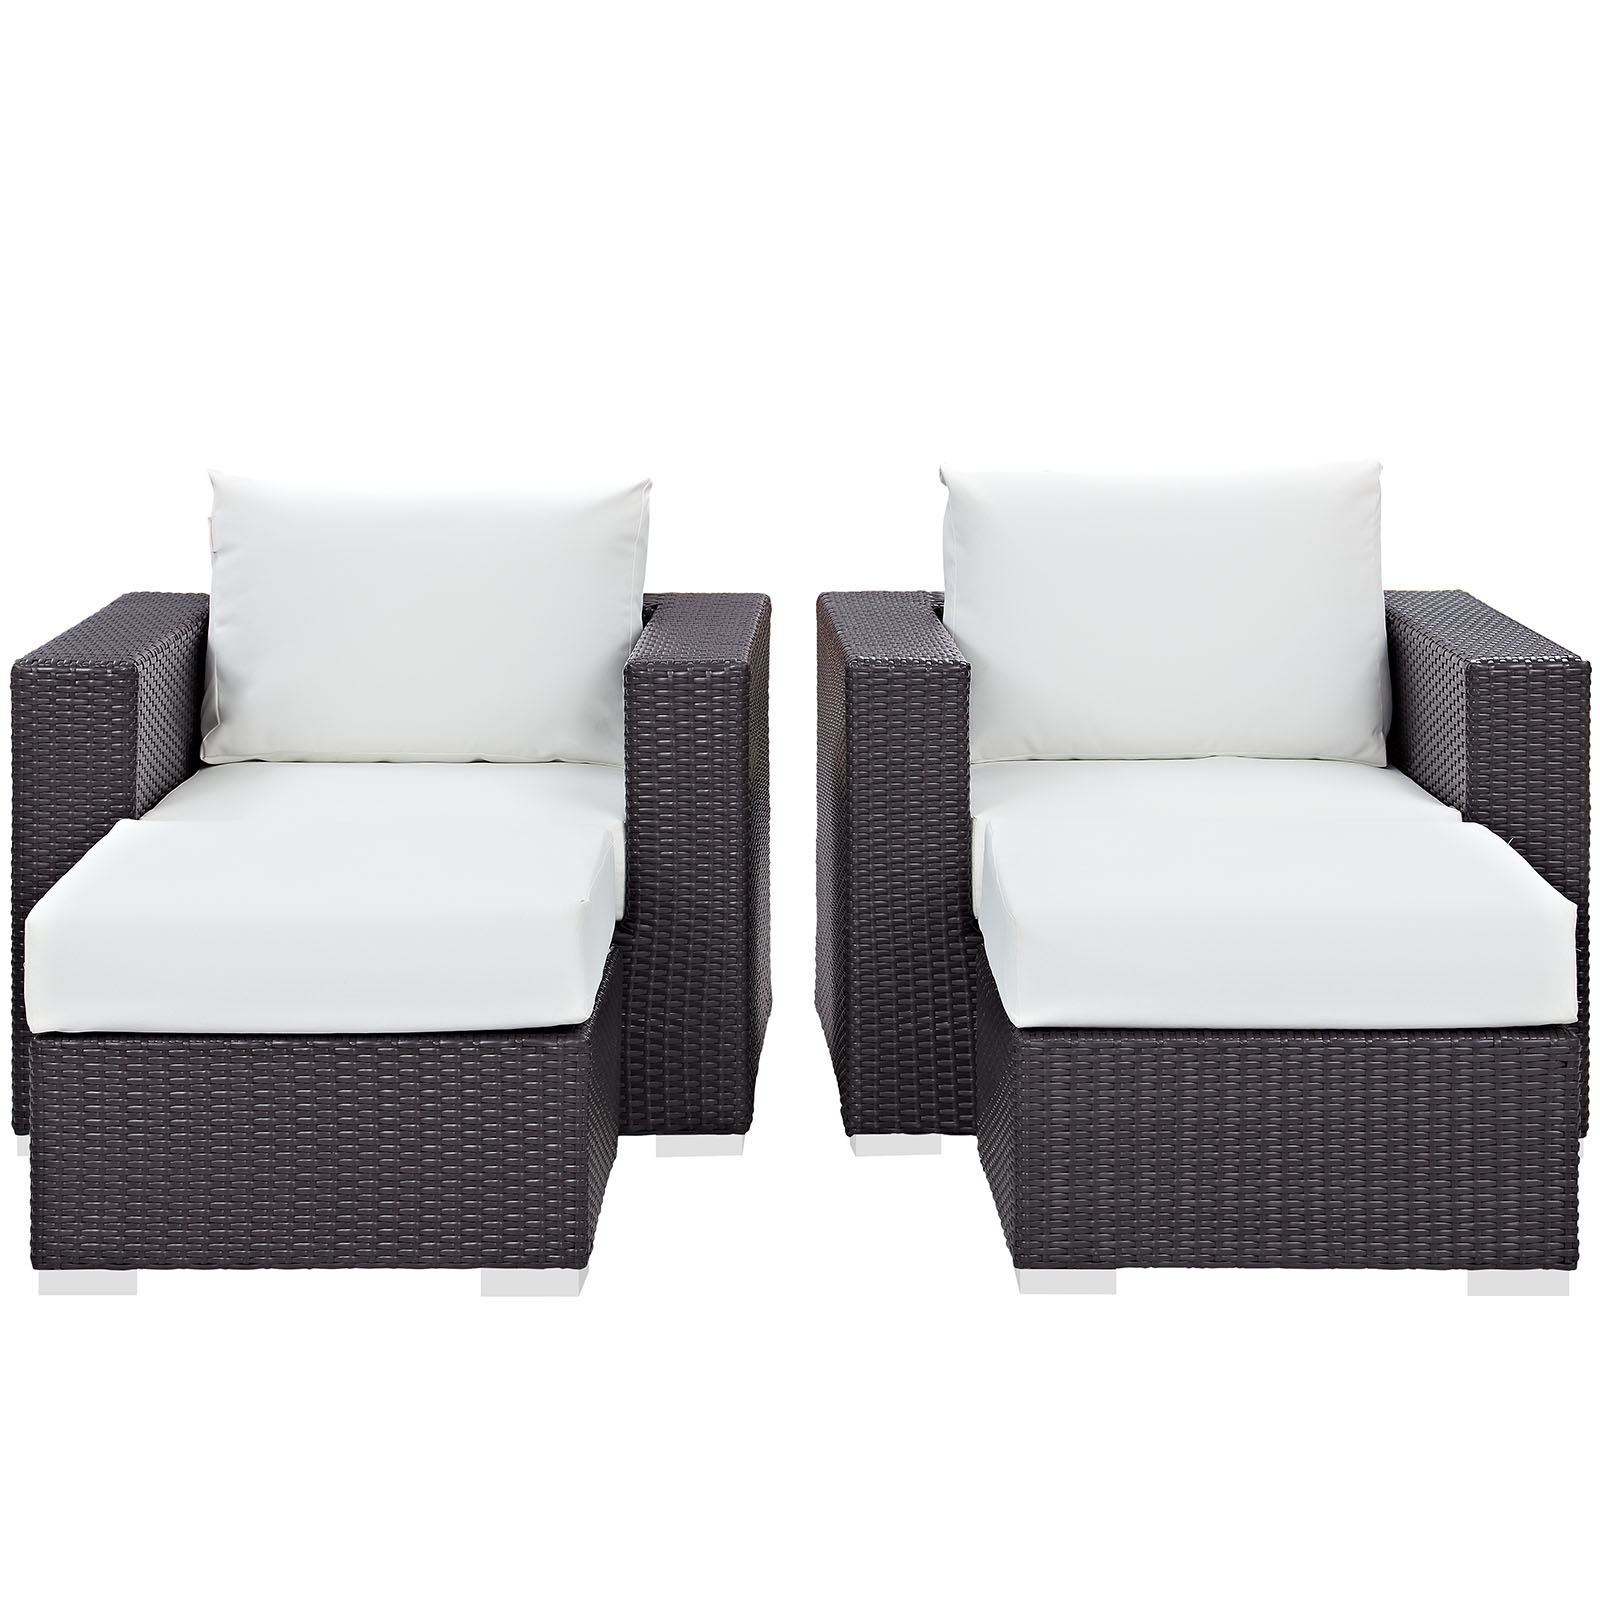 Modway Convene 4 Piece Outdoor Patio Sectional Set in Espresso White - image 4 of 6